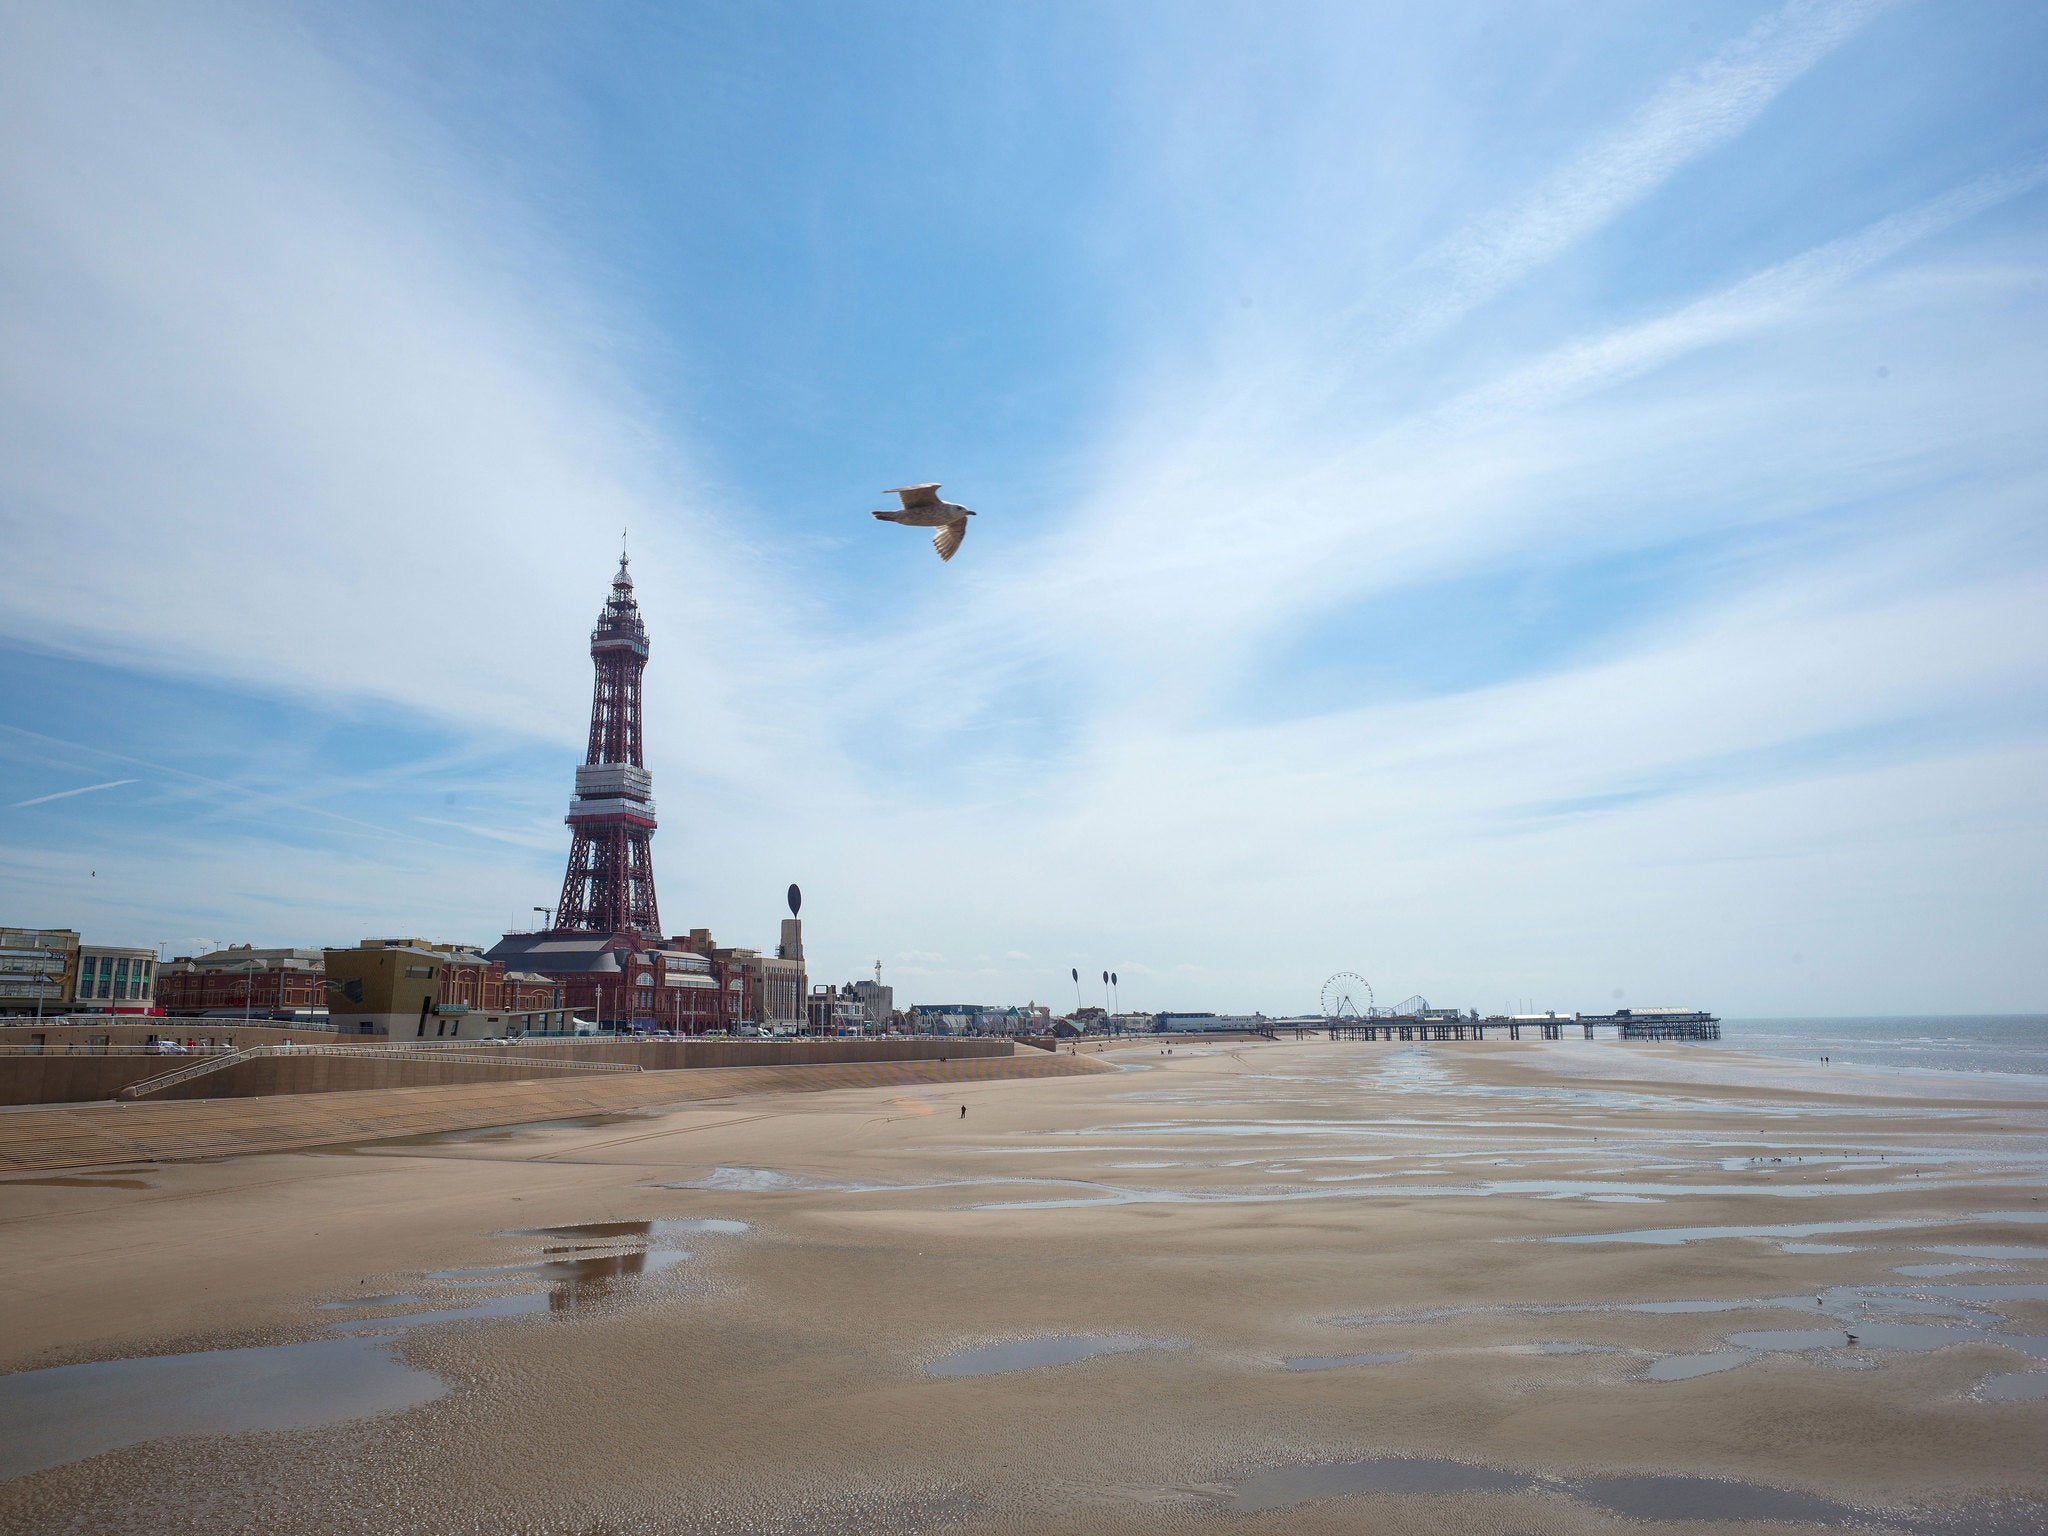 Michael Cartwright, 60, found the body at the sea wall in Bispham, two miles north of the famous Blackpool Tower